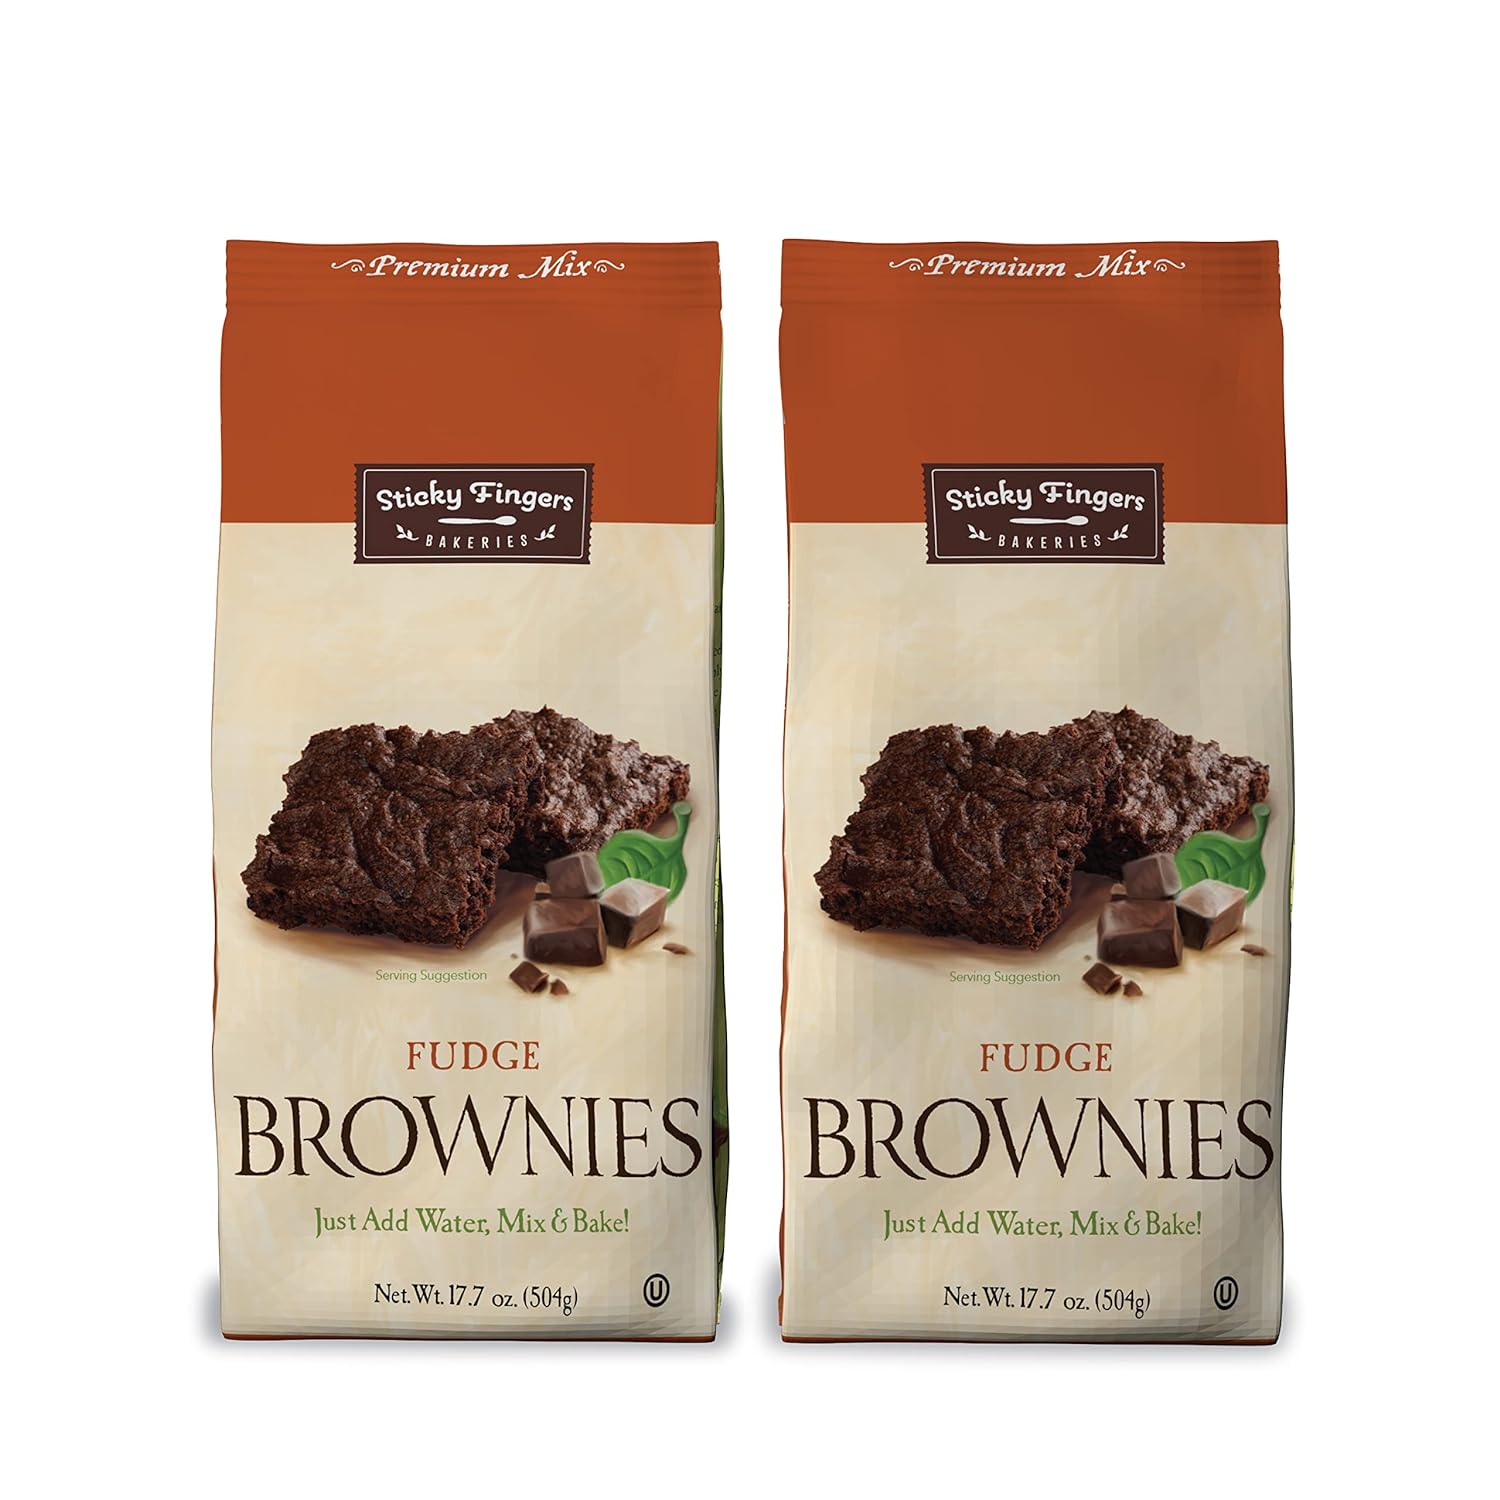 Fudge Brownie Mix by Sticky Fingers Bakeries – Baking Mix for Homemade Chocolate Fudge Brownies, Made with Semi Sweet Chocolate Chips, Makes 16 Brownies Per Pack (2pk)